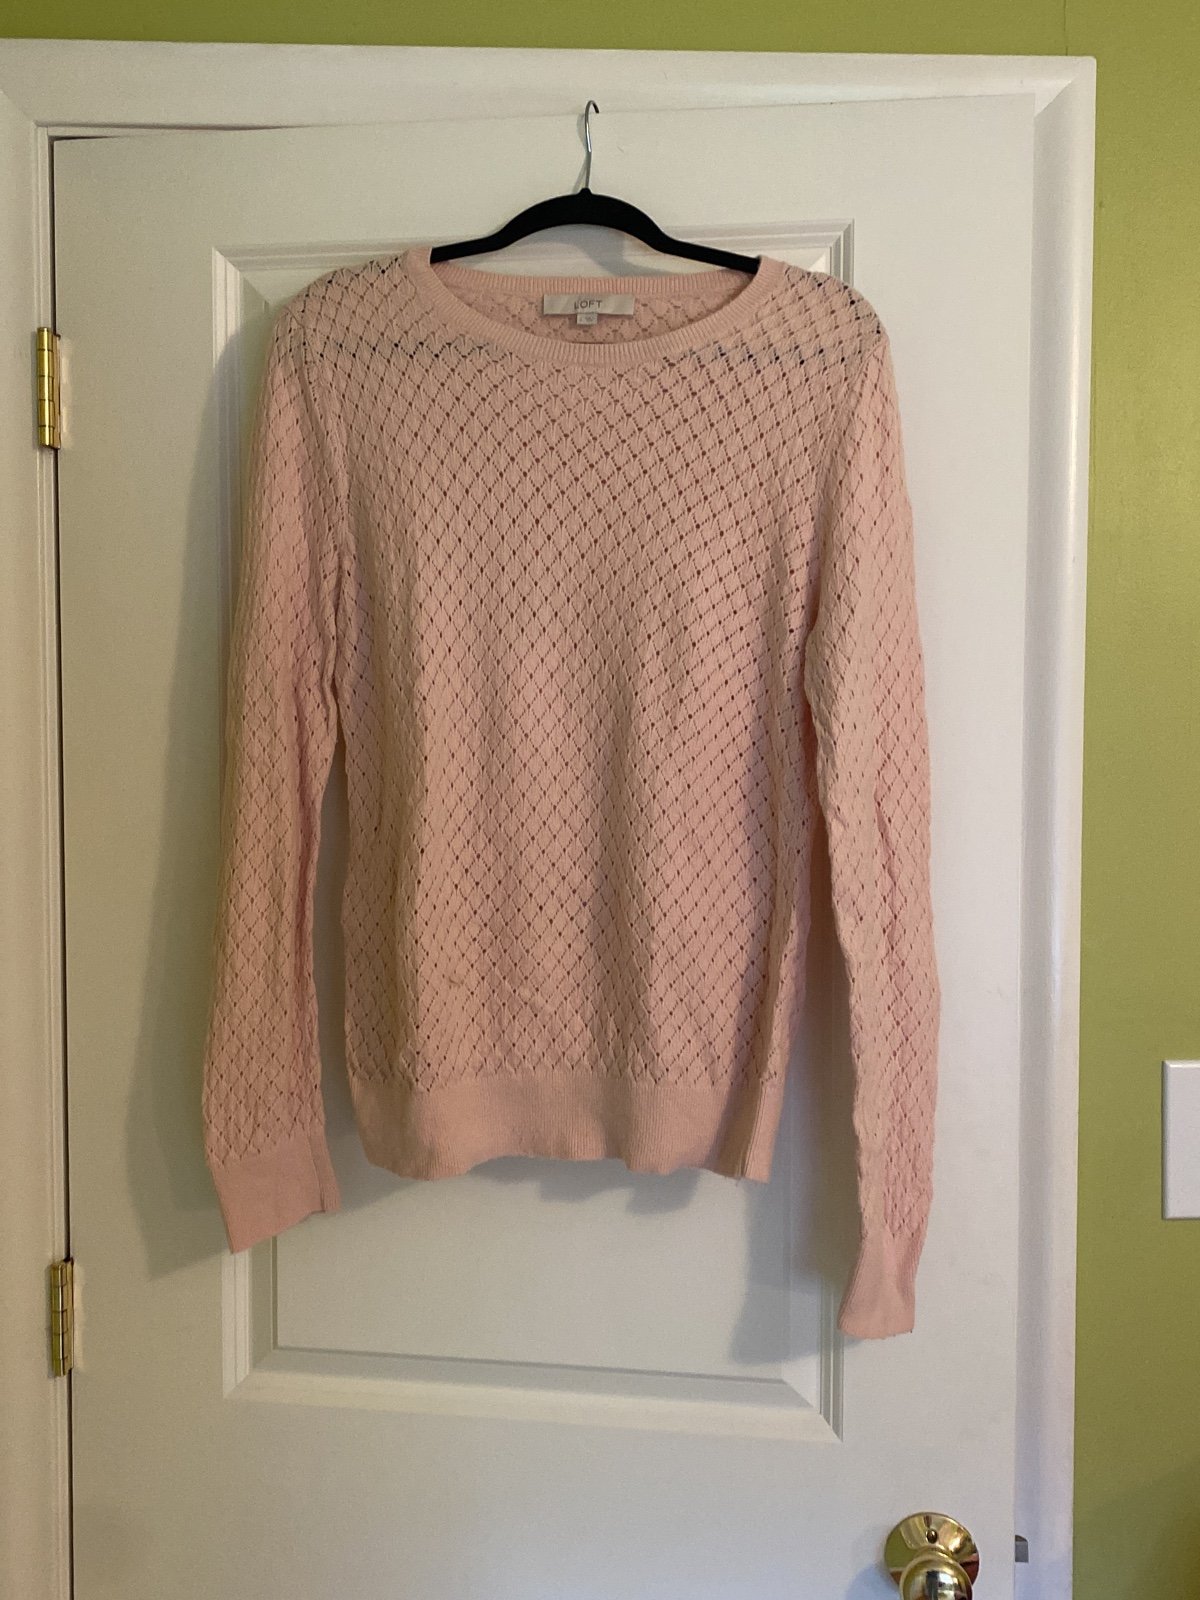 Gorgeous Knit Sweater Ib2ZsqHc9 all for you